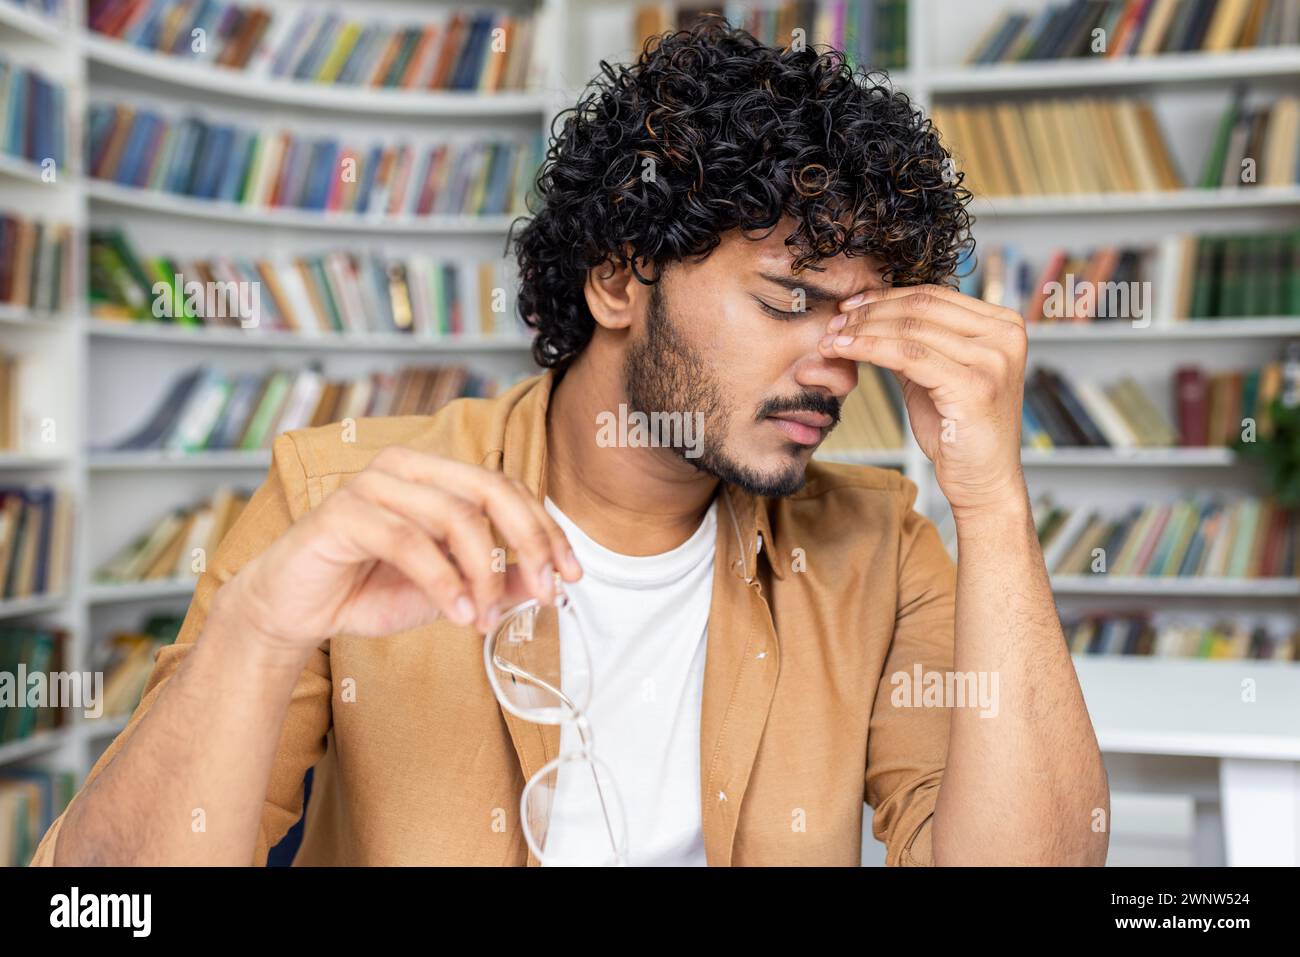 A young man with curly hair appears stressed and holds his head in pain, showing signs of a headache. He has taken off his eyeglasses, perhaps after reading or studying for long hours. Stock Photo